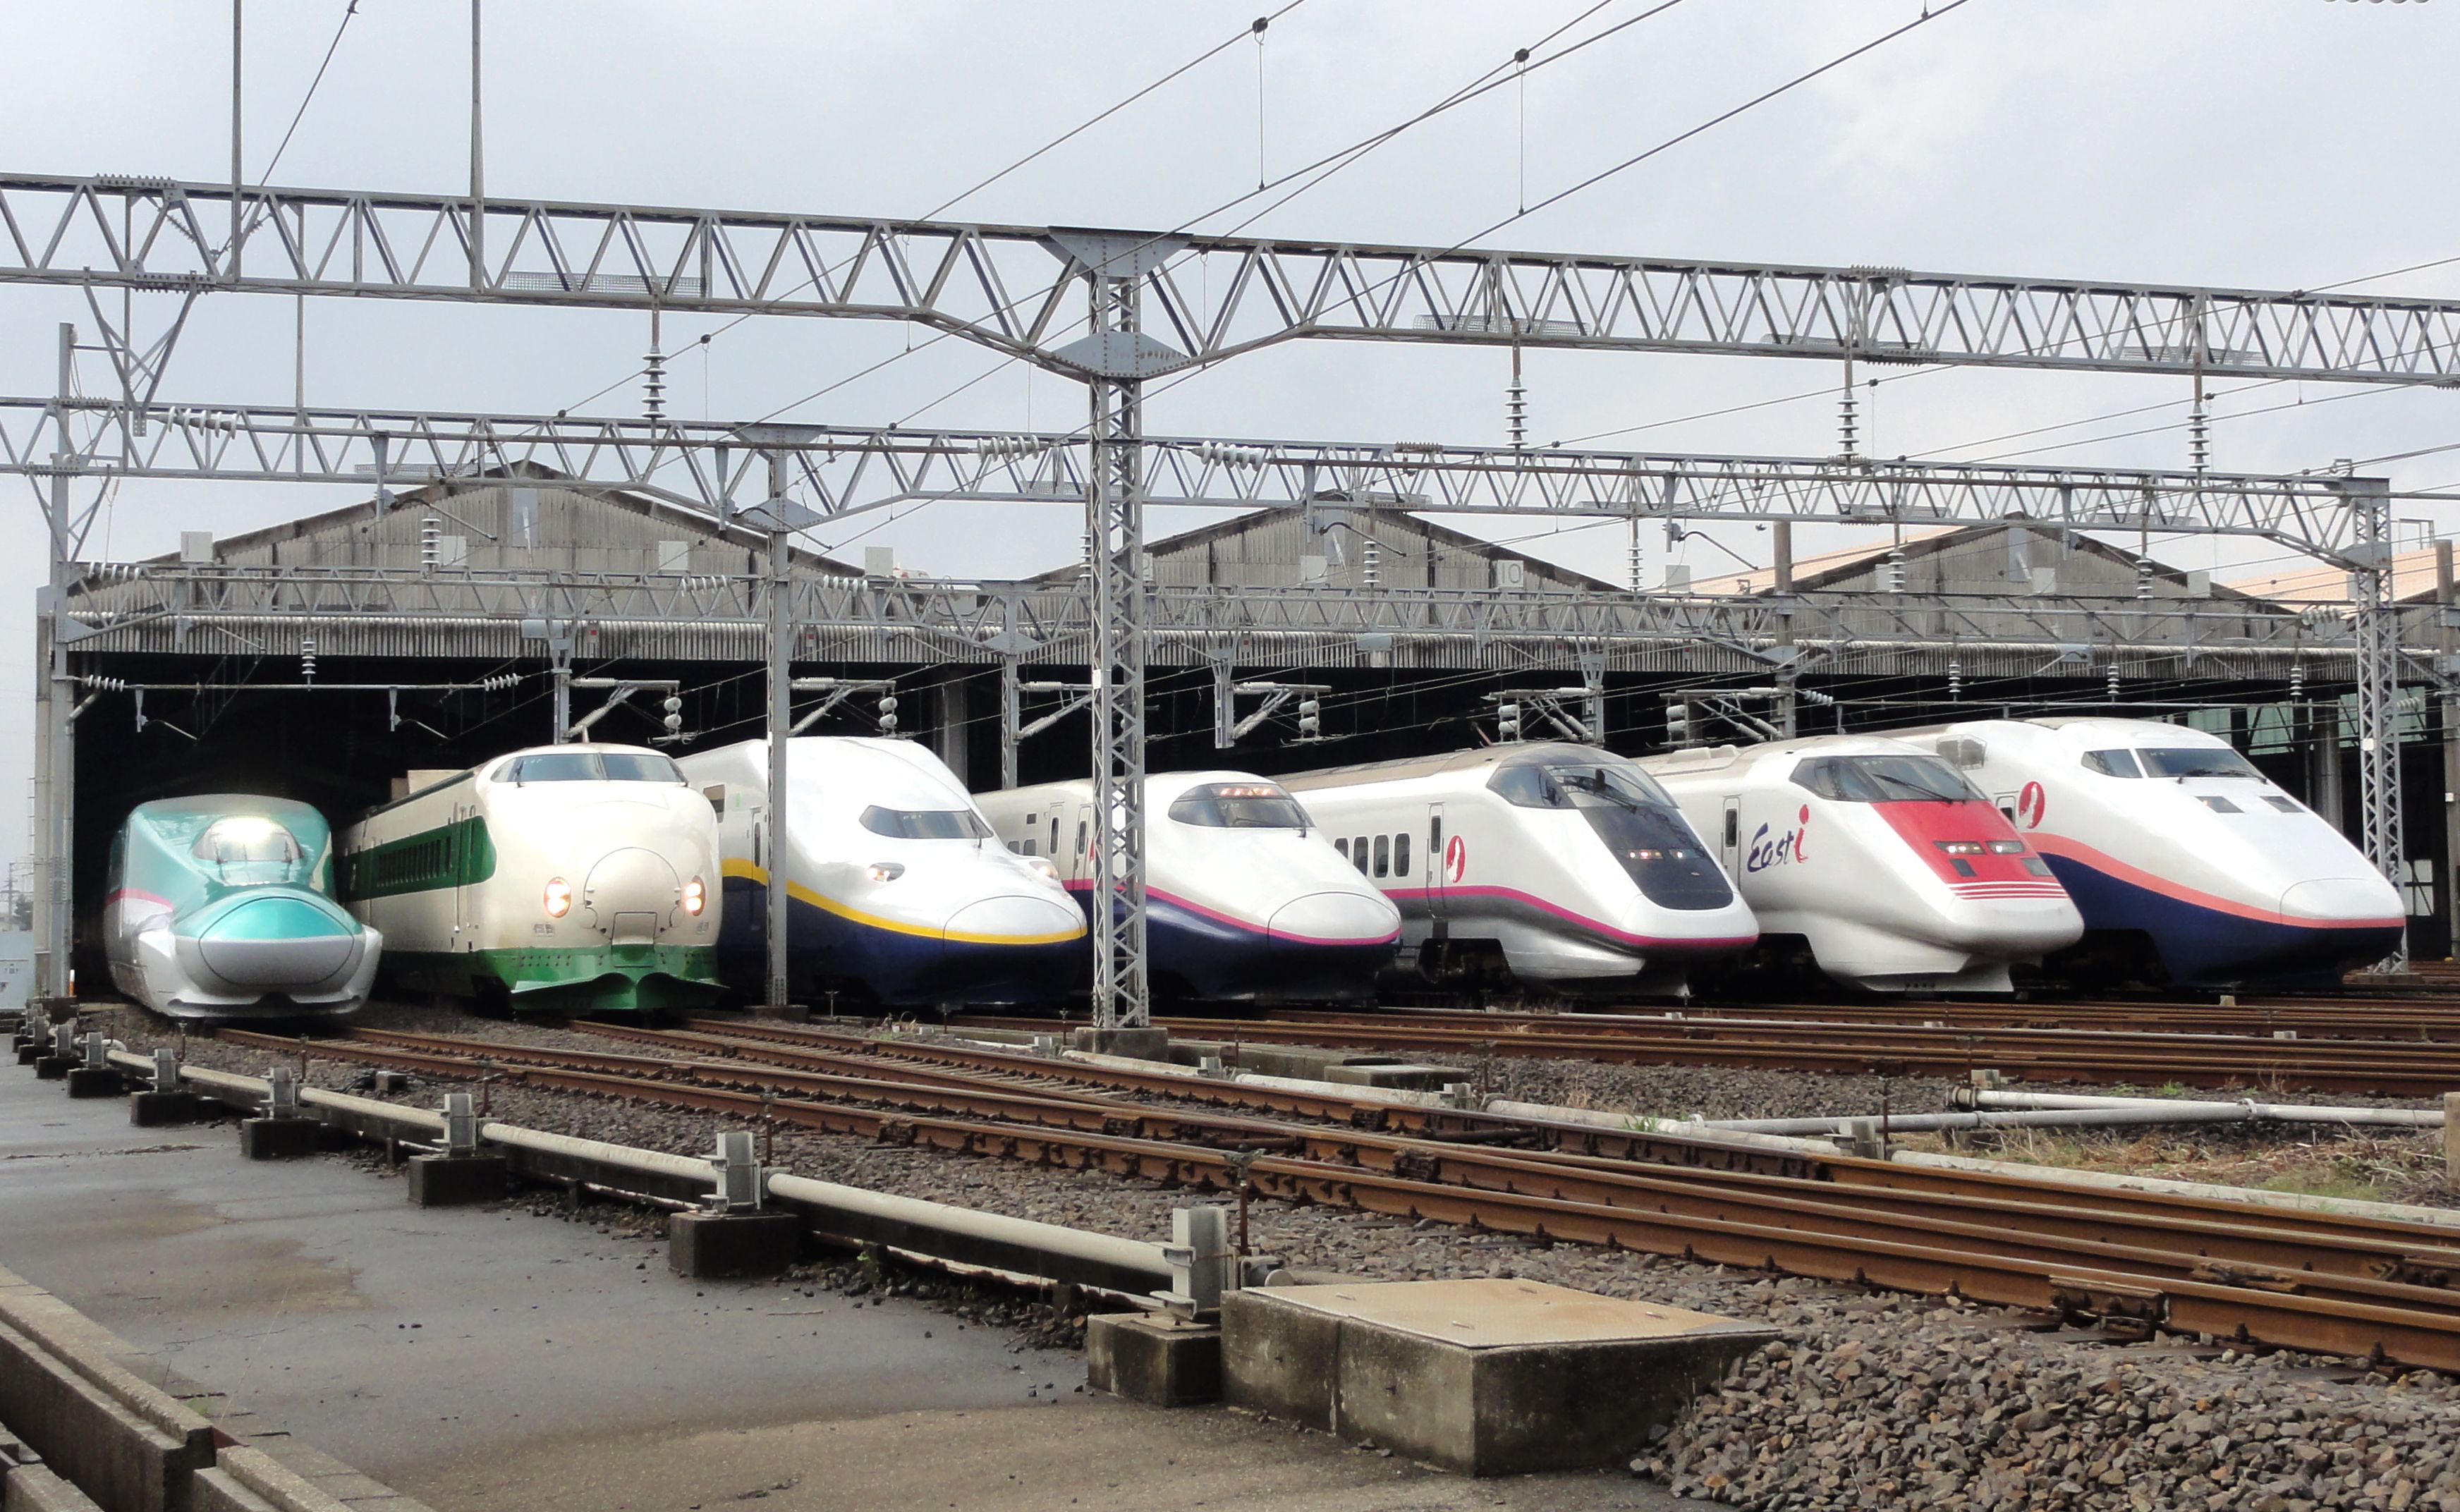 RIDING JAPAN ON HIGH SPEED The Mighty Train That Lets You Discover A